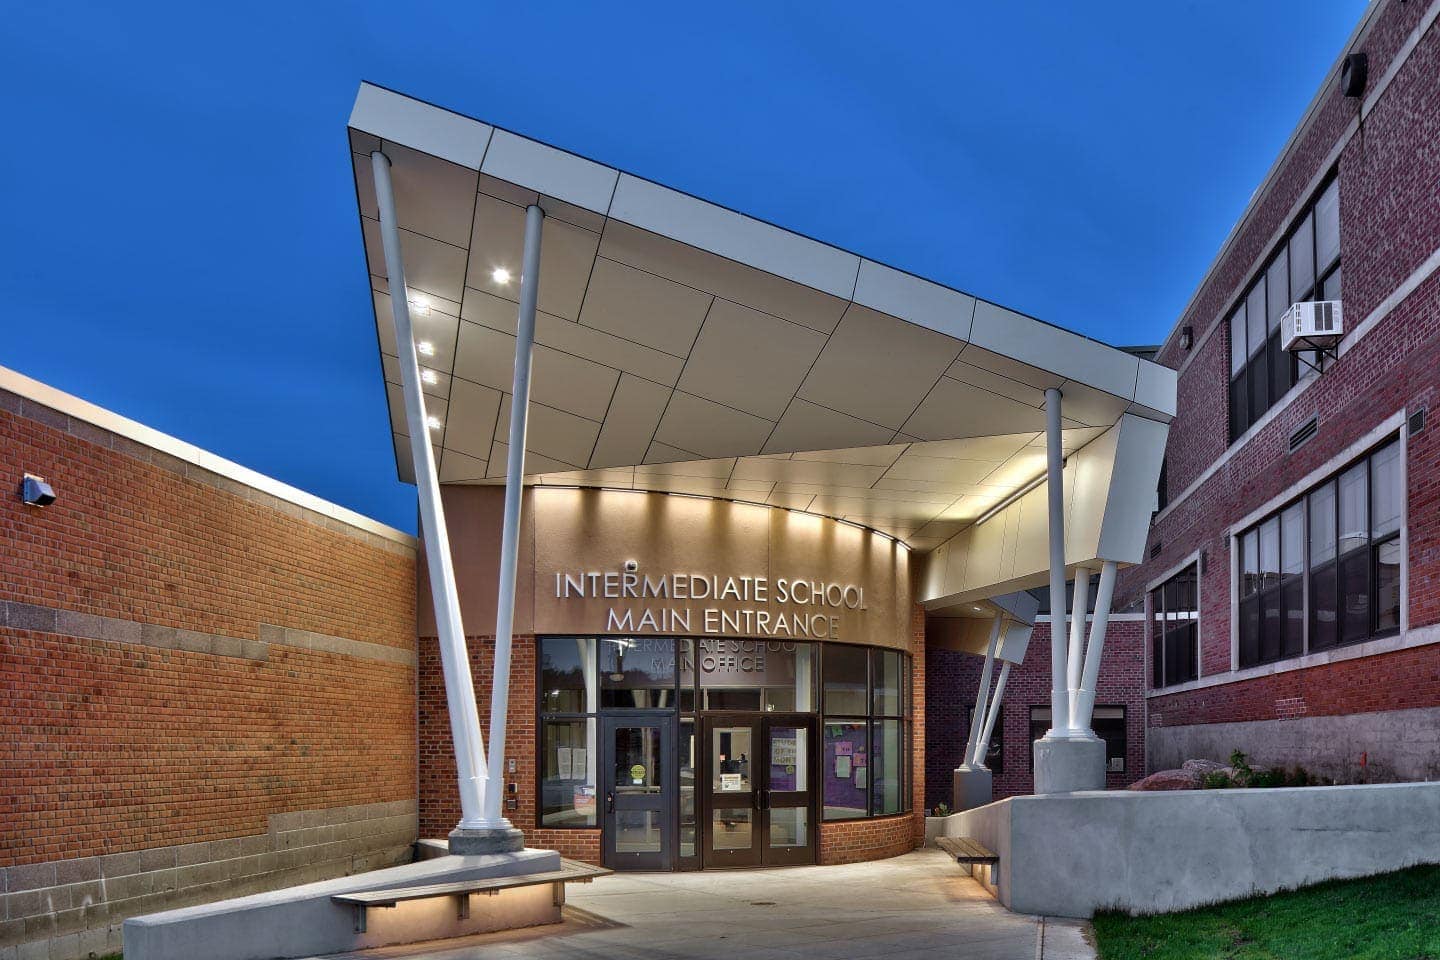 Learn more about Sodus High School in our case study to see how phenolic panels were used